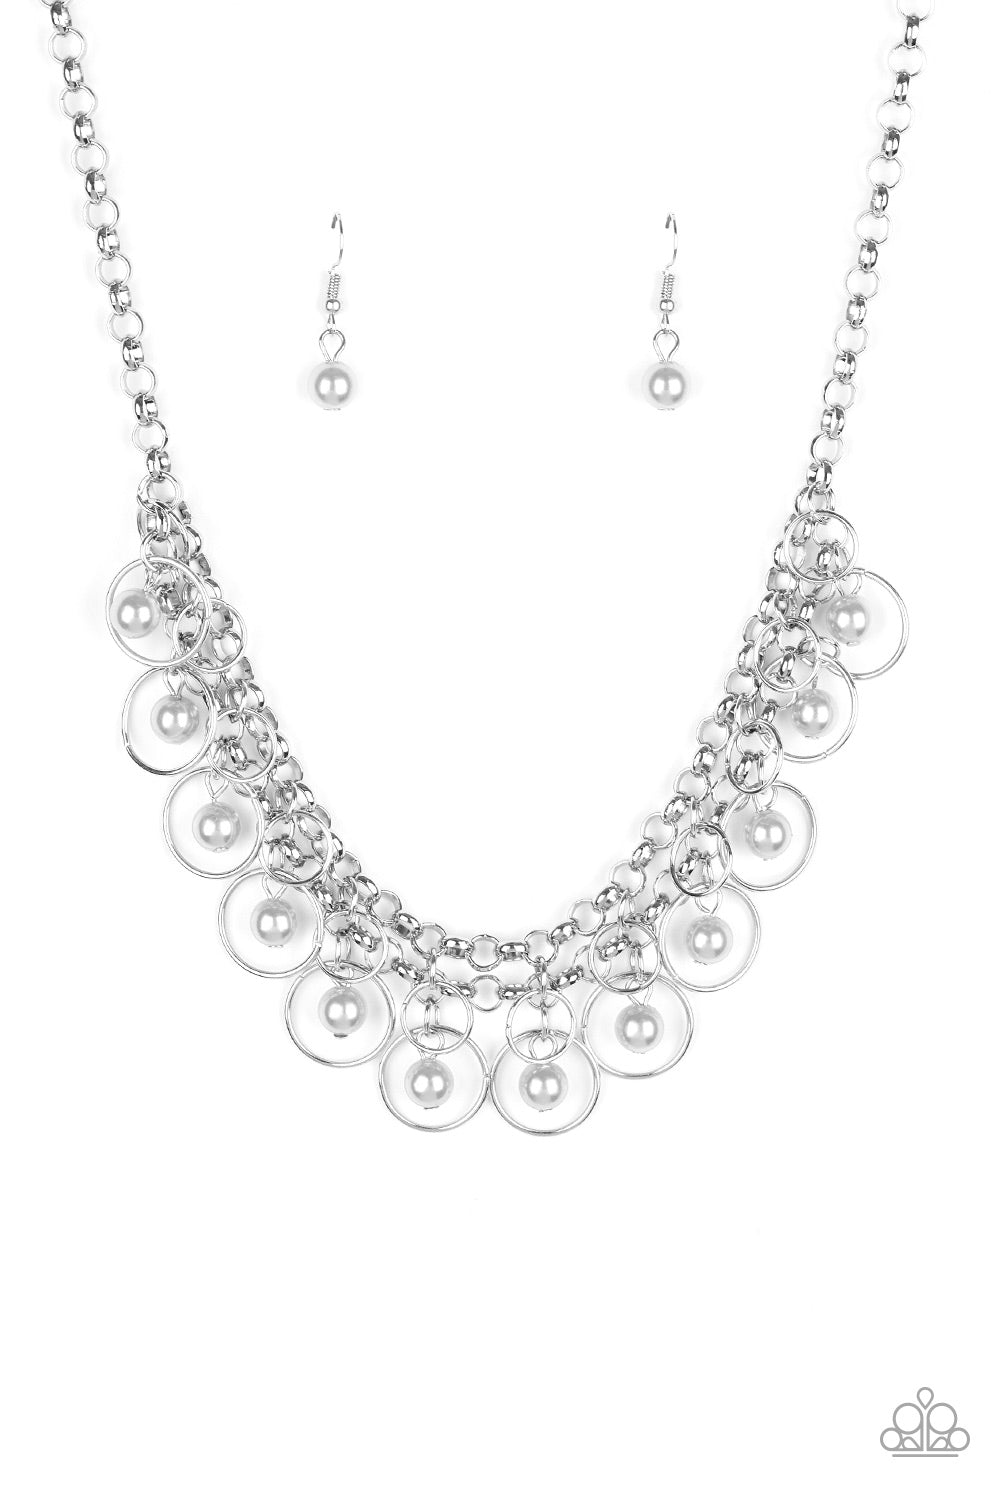 PARTY TIME - SILVER GRAY PEARLS IN HOOPS NECKLACE